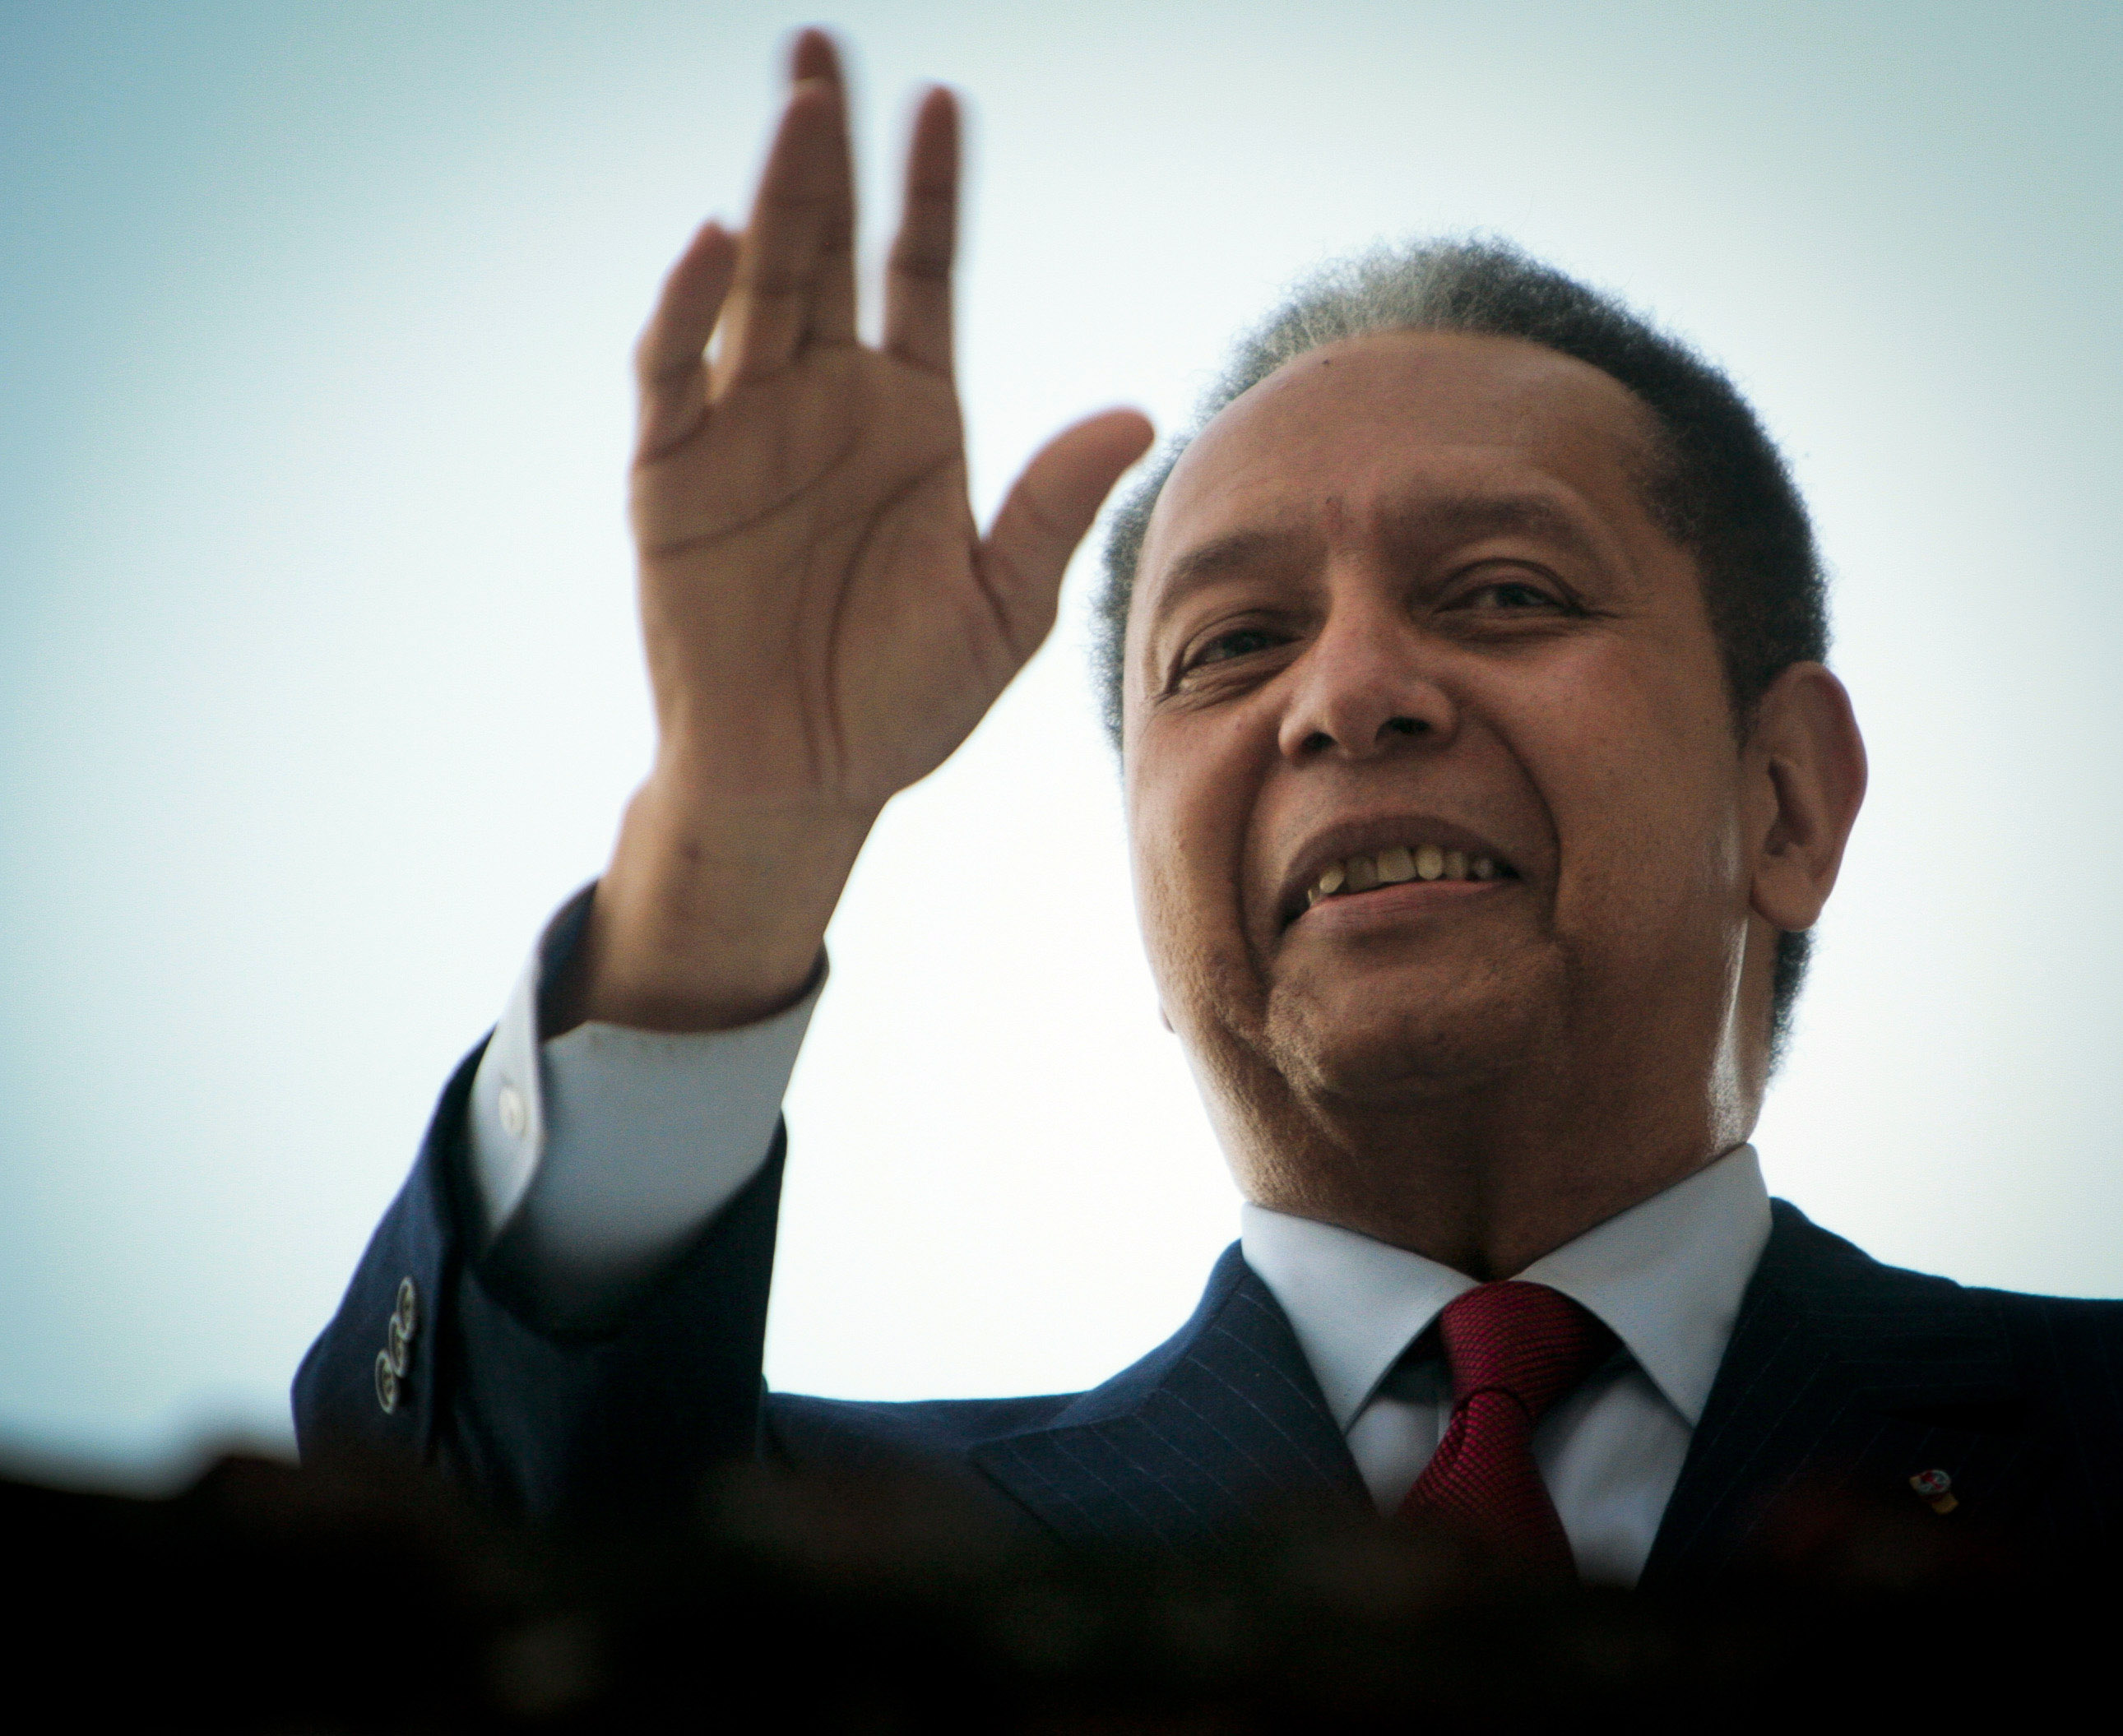 Former leader of Haiti Jean-Claude "Baby Doc" Duvalier waves from a balcony following a press conference at his house in Petionville January 21, 2011 in Port-au-Prince, Haiti. (Lee Celano—Getty Images)